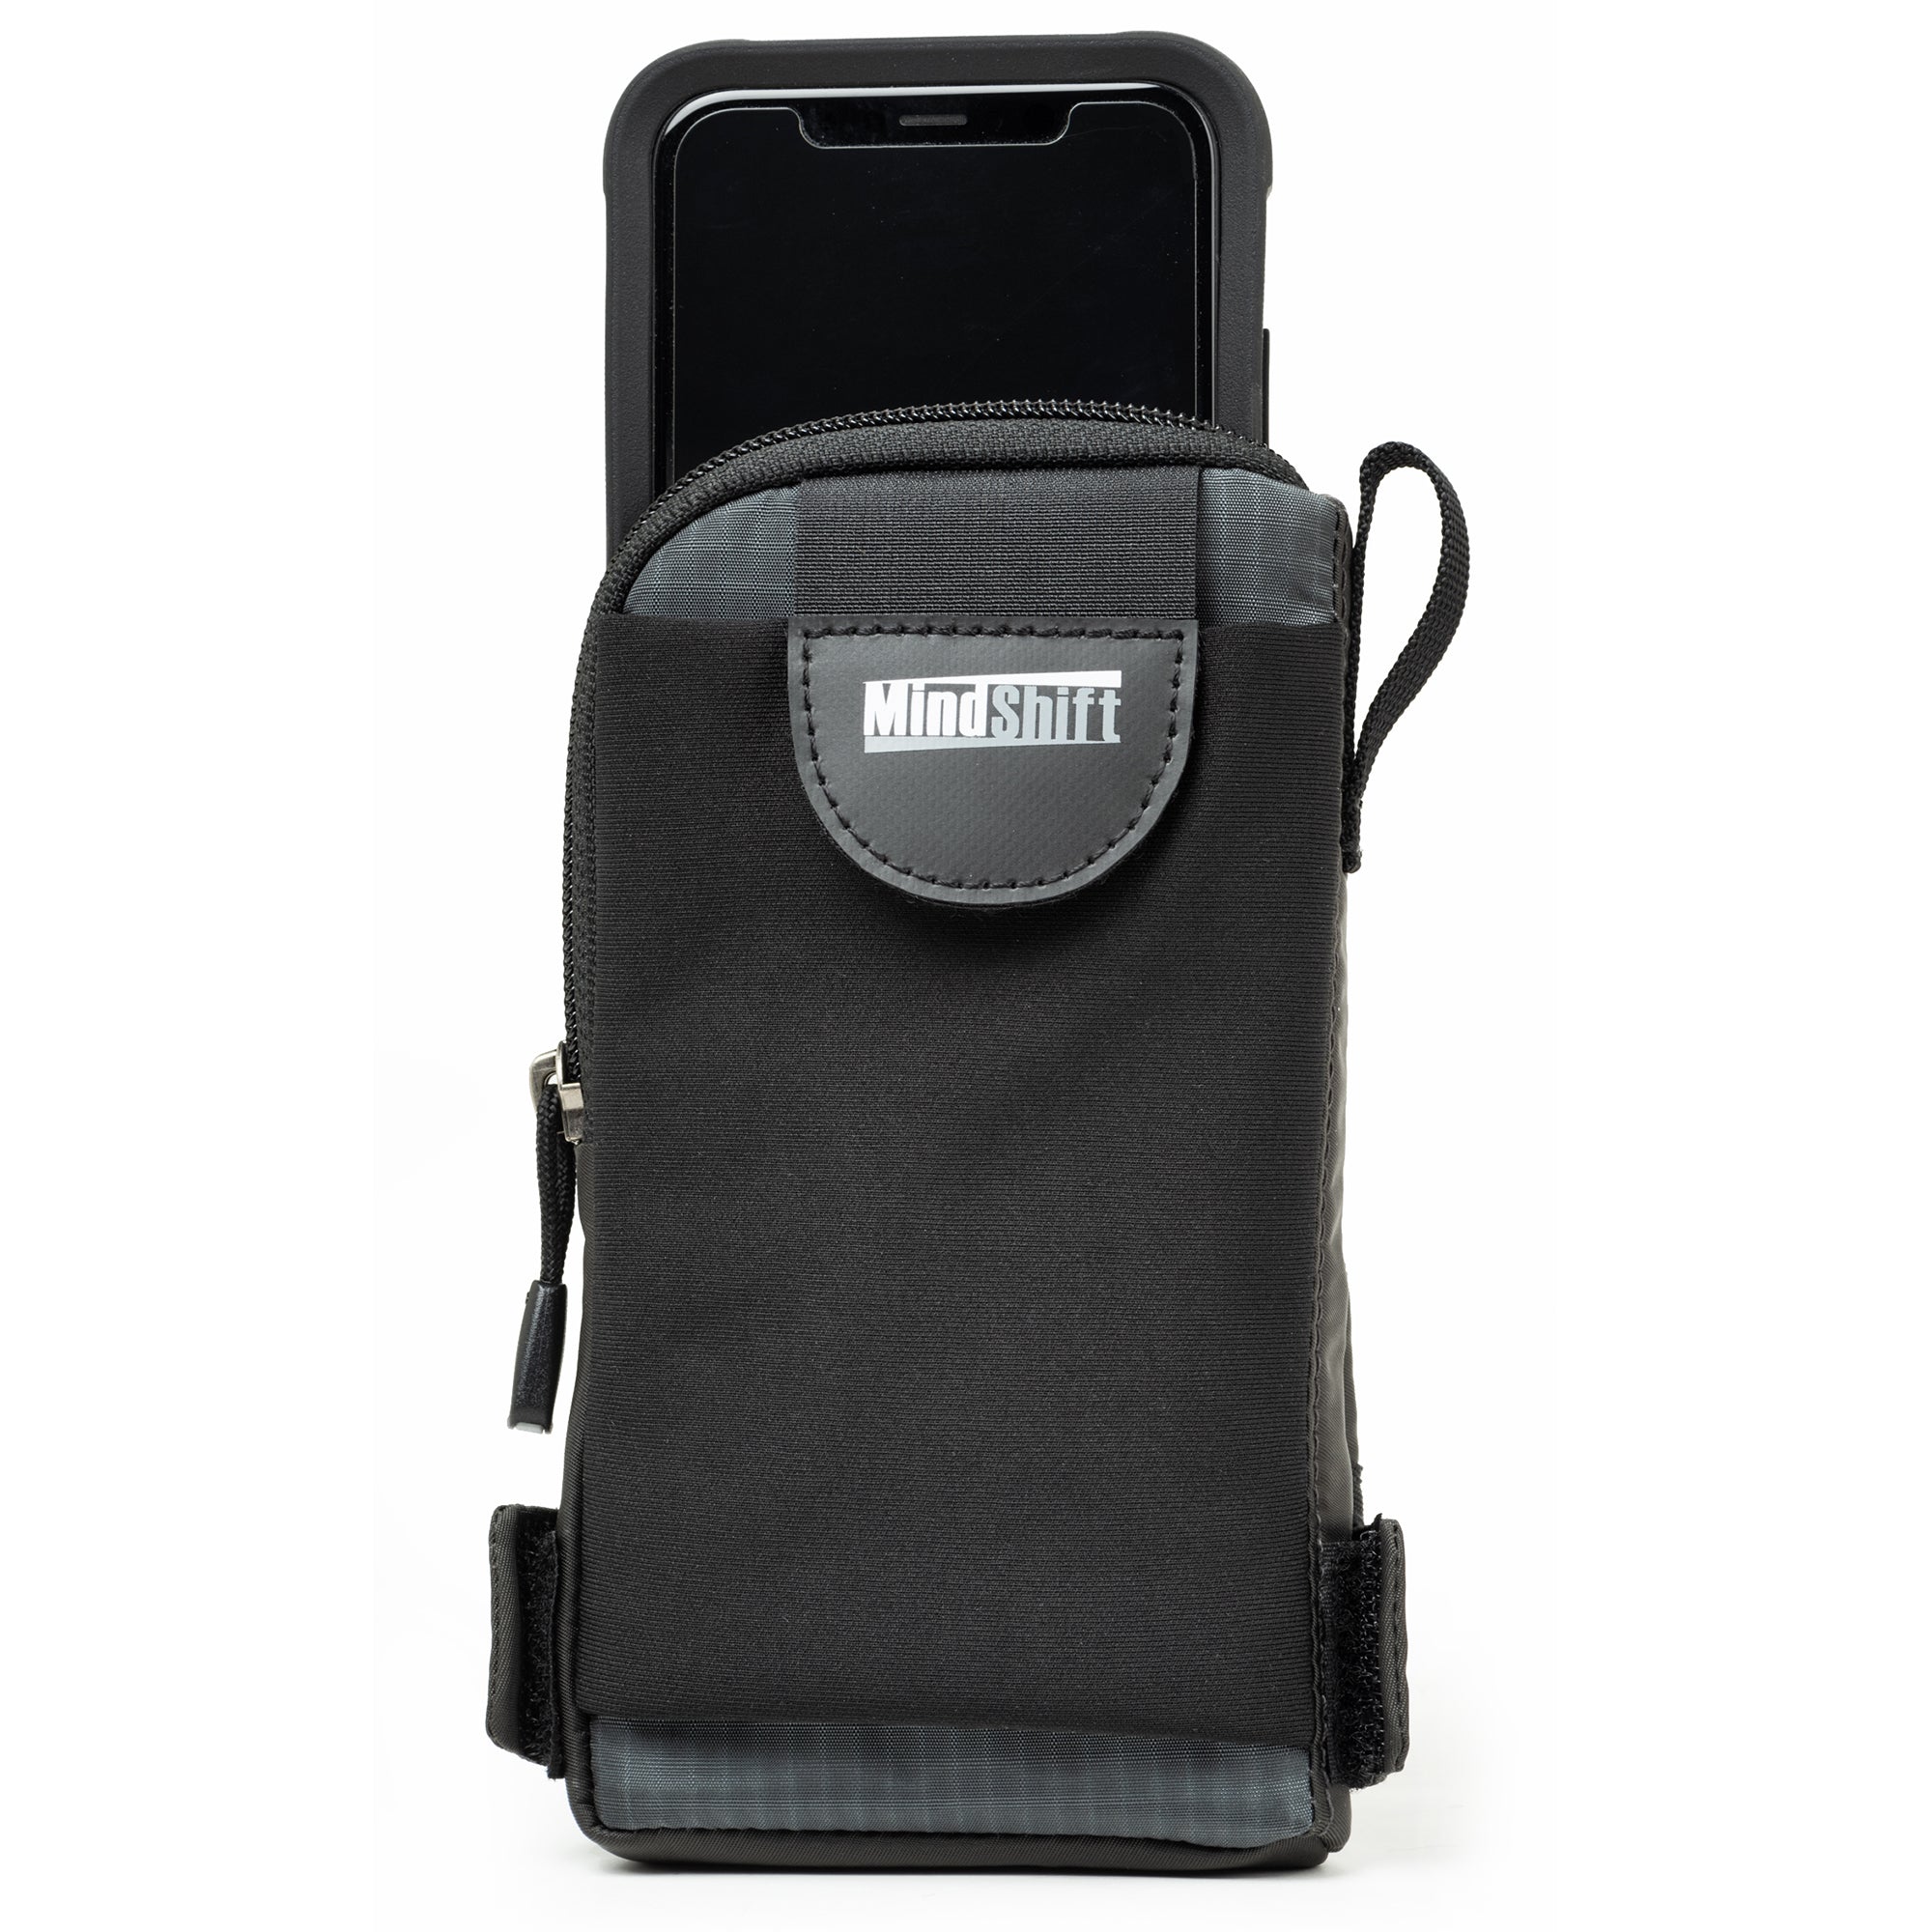 Multi-Purpose Smartphone Pouch, Belt Loop Phone Pouch, Cell Phone Holder,  Tool Holder, Tactical Phone Holster Carrying Case, Men’s Waist Pocket for